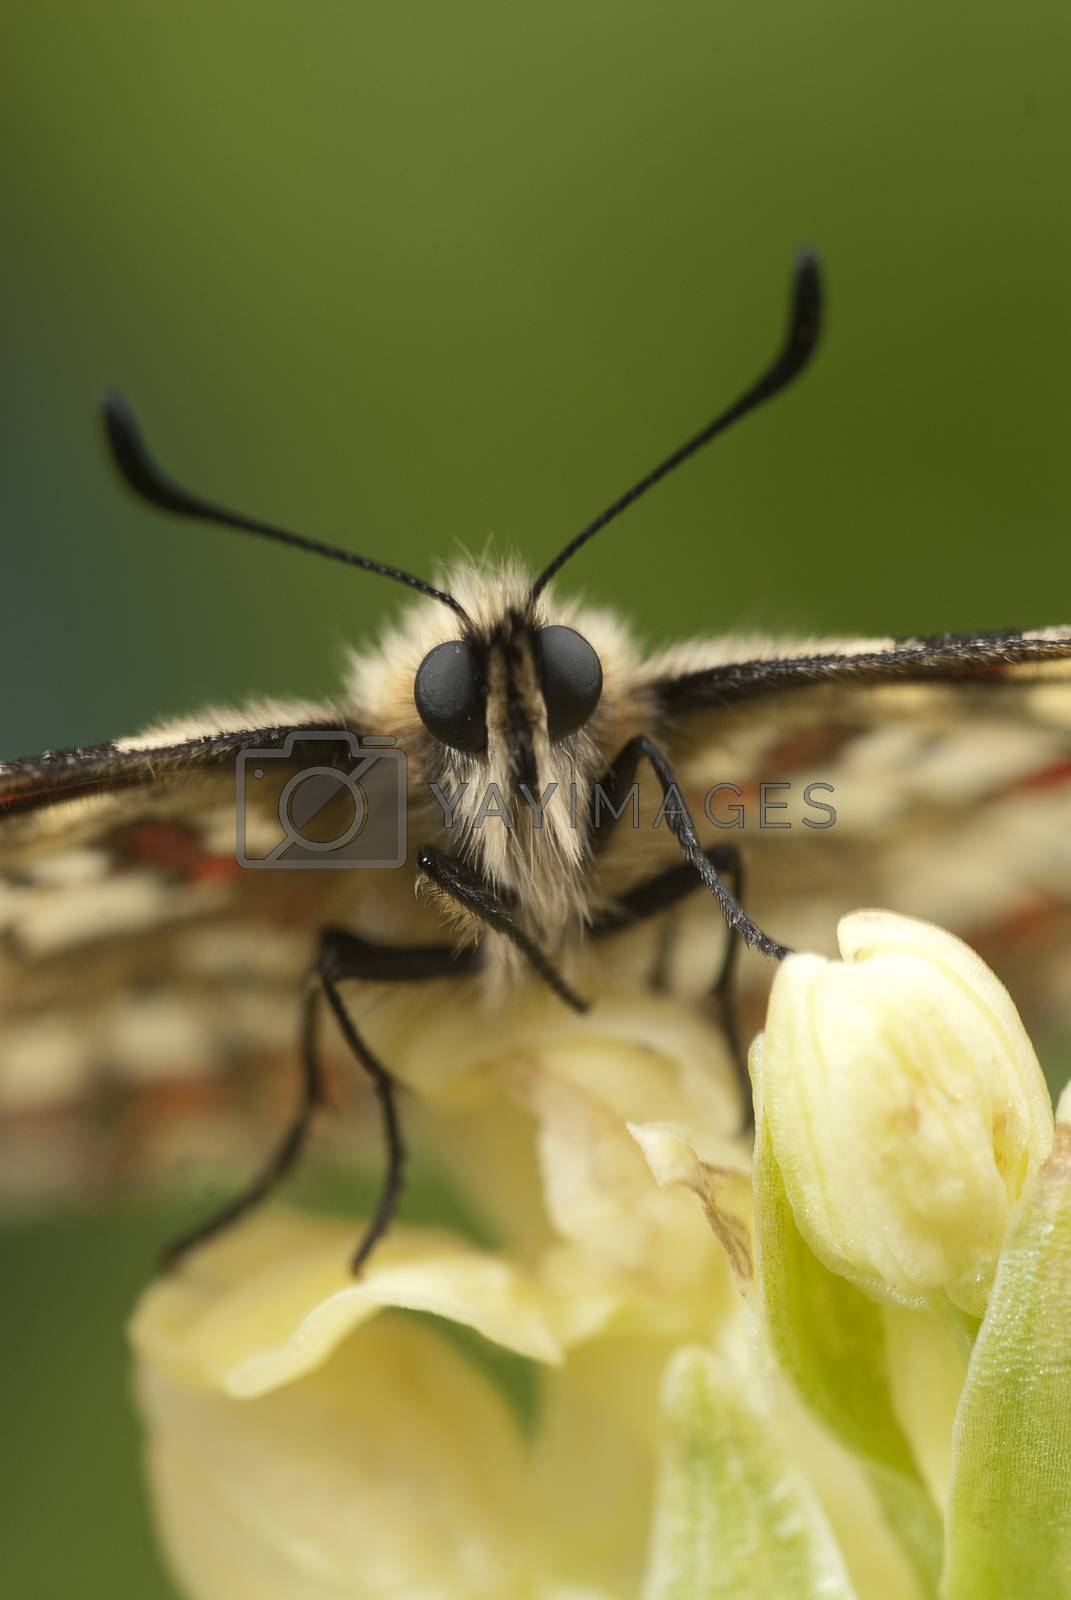 Royalty free image of Spanish Festoon butterfly Zerynthia rumina perched on an orchid, by jalonsohu@gmail.com